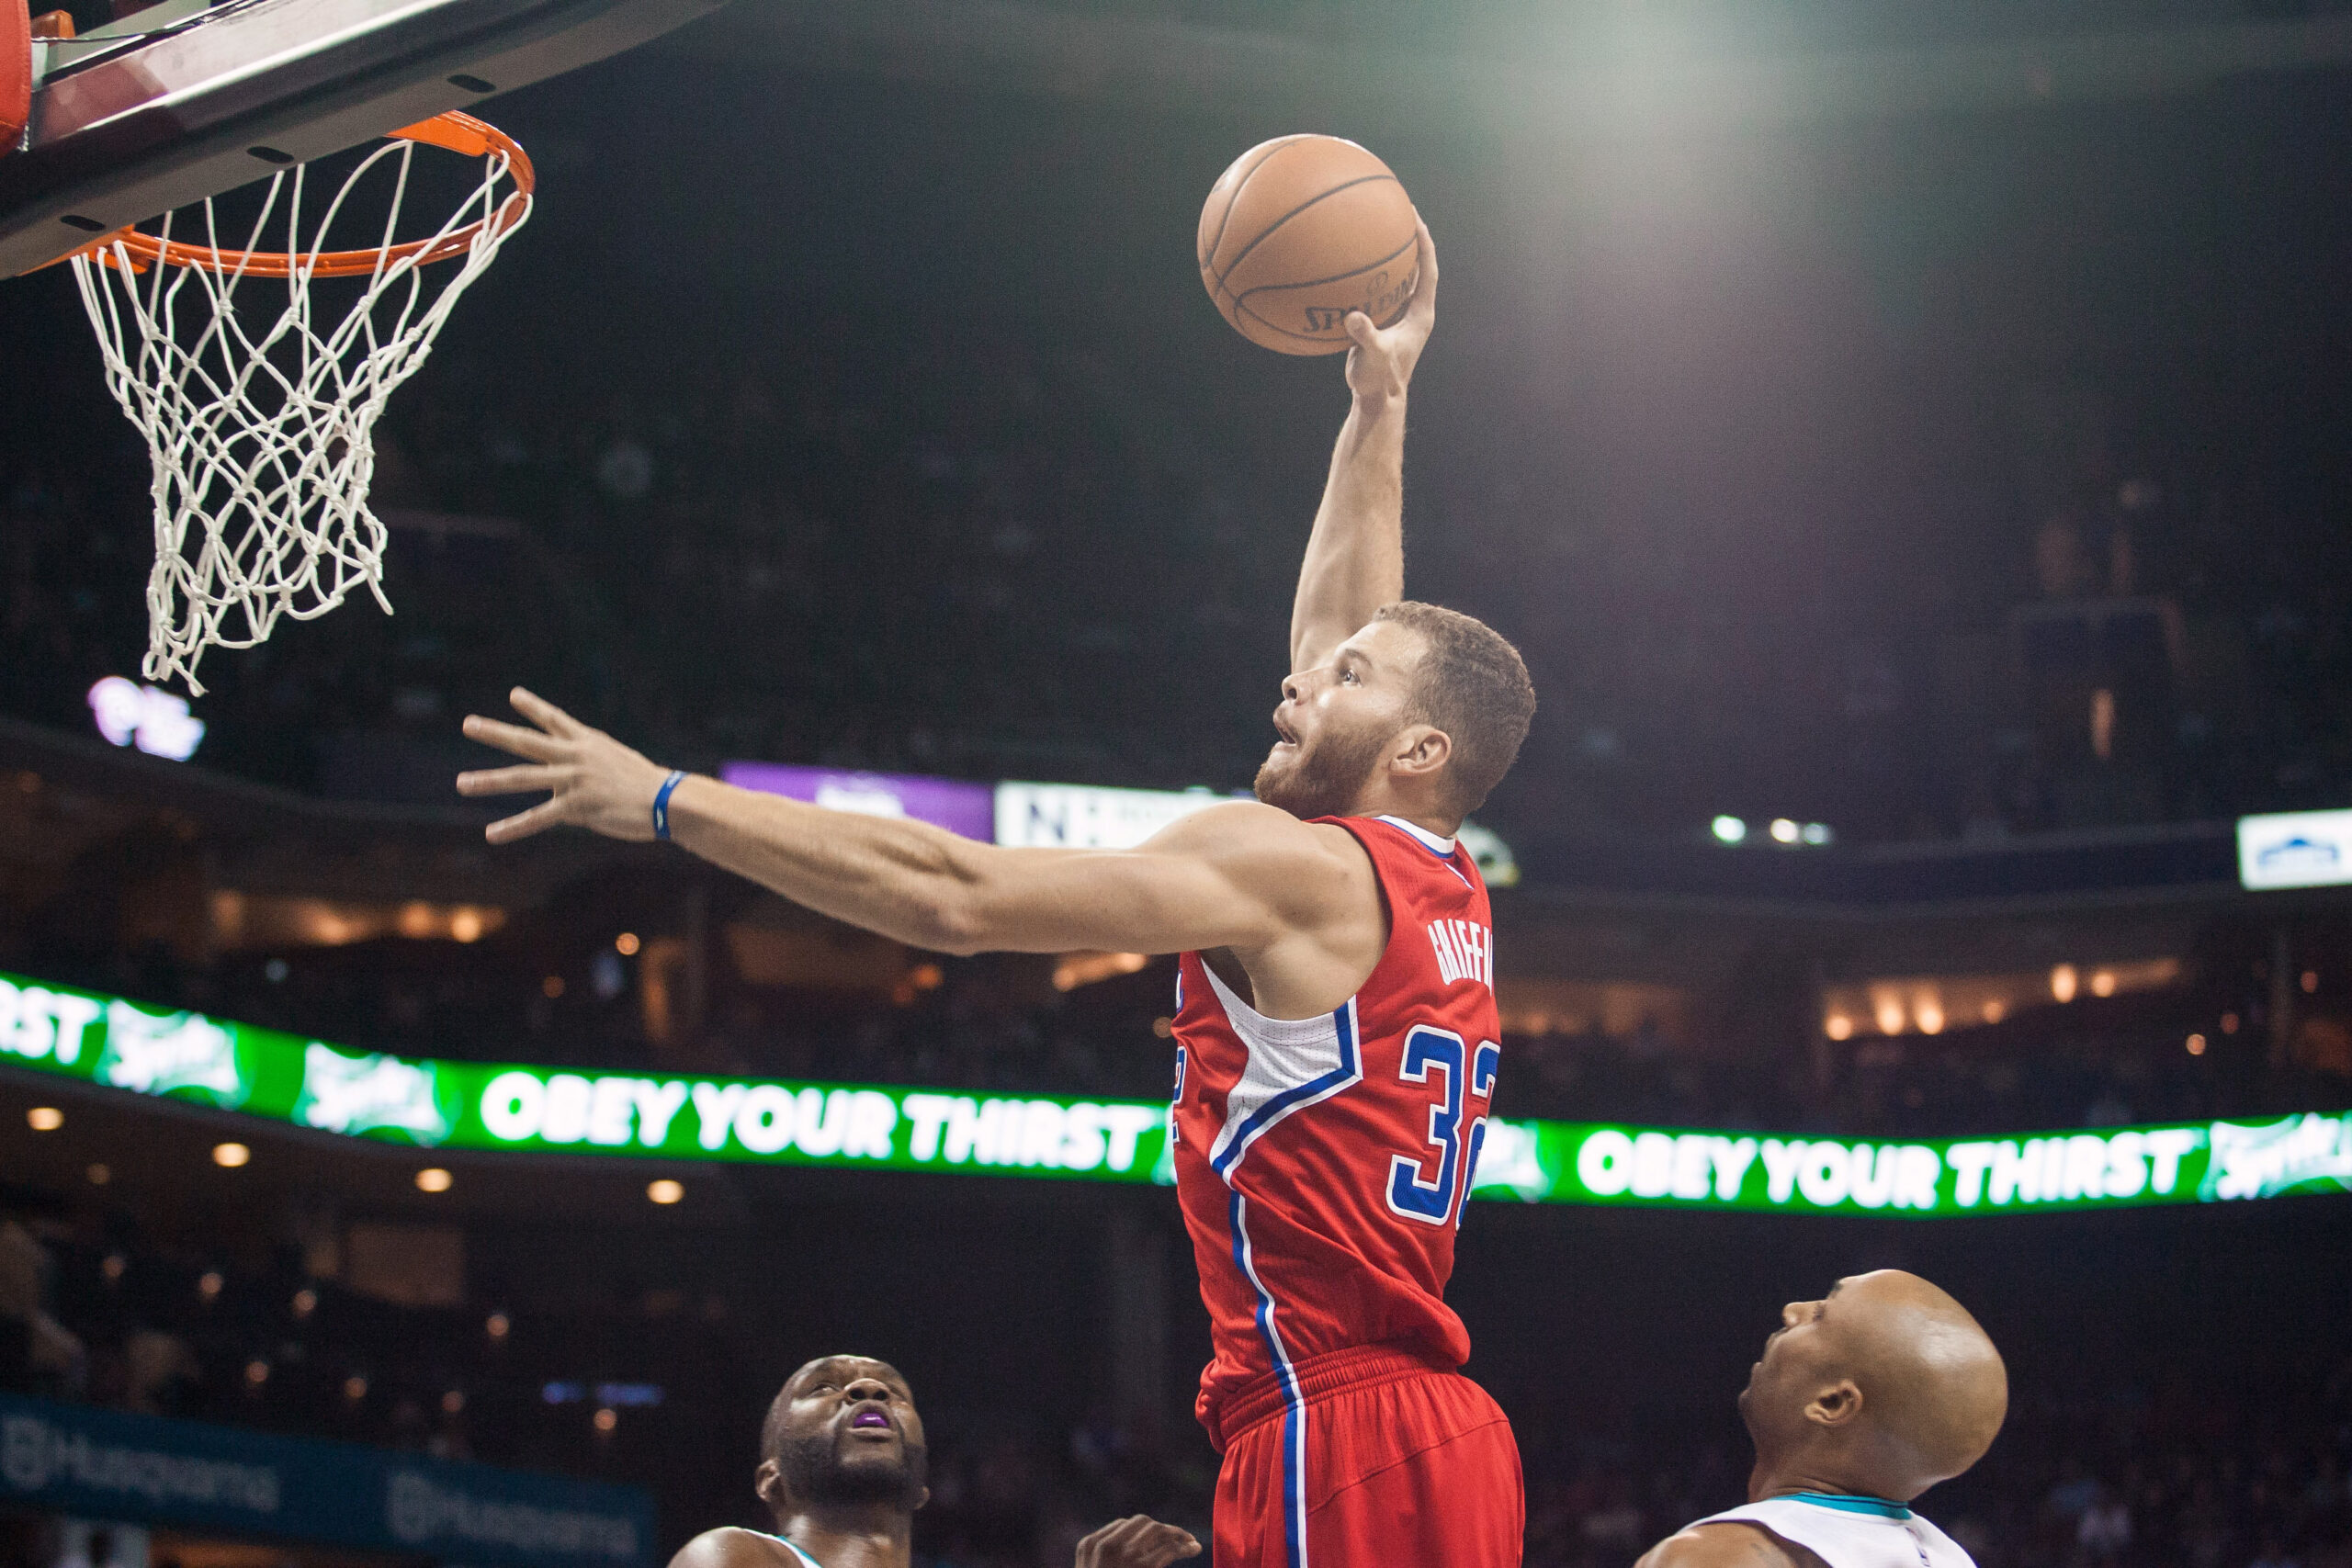 Nov 24, 2014; Charlotte, NC, USA; Los Angeles Clippers forward Blake Griffin (32) goes up to dunk the ball during the first half against the Charlotte Hornets at Time Warner Cable Arena. Mandatory Credit: Jeremy Brevard-USA TODAY Sports